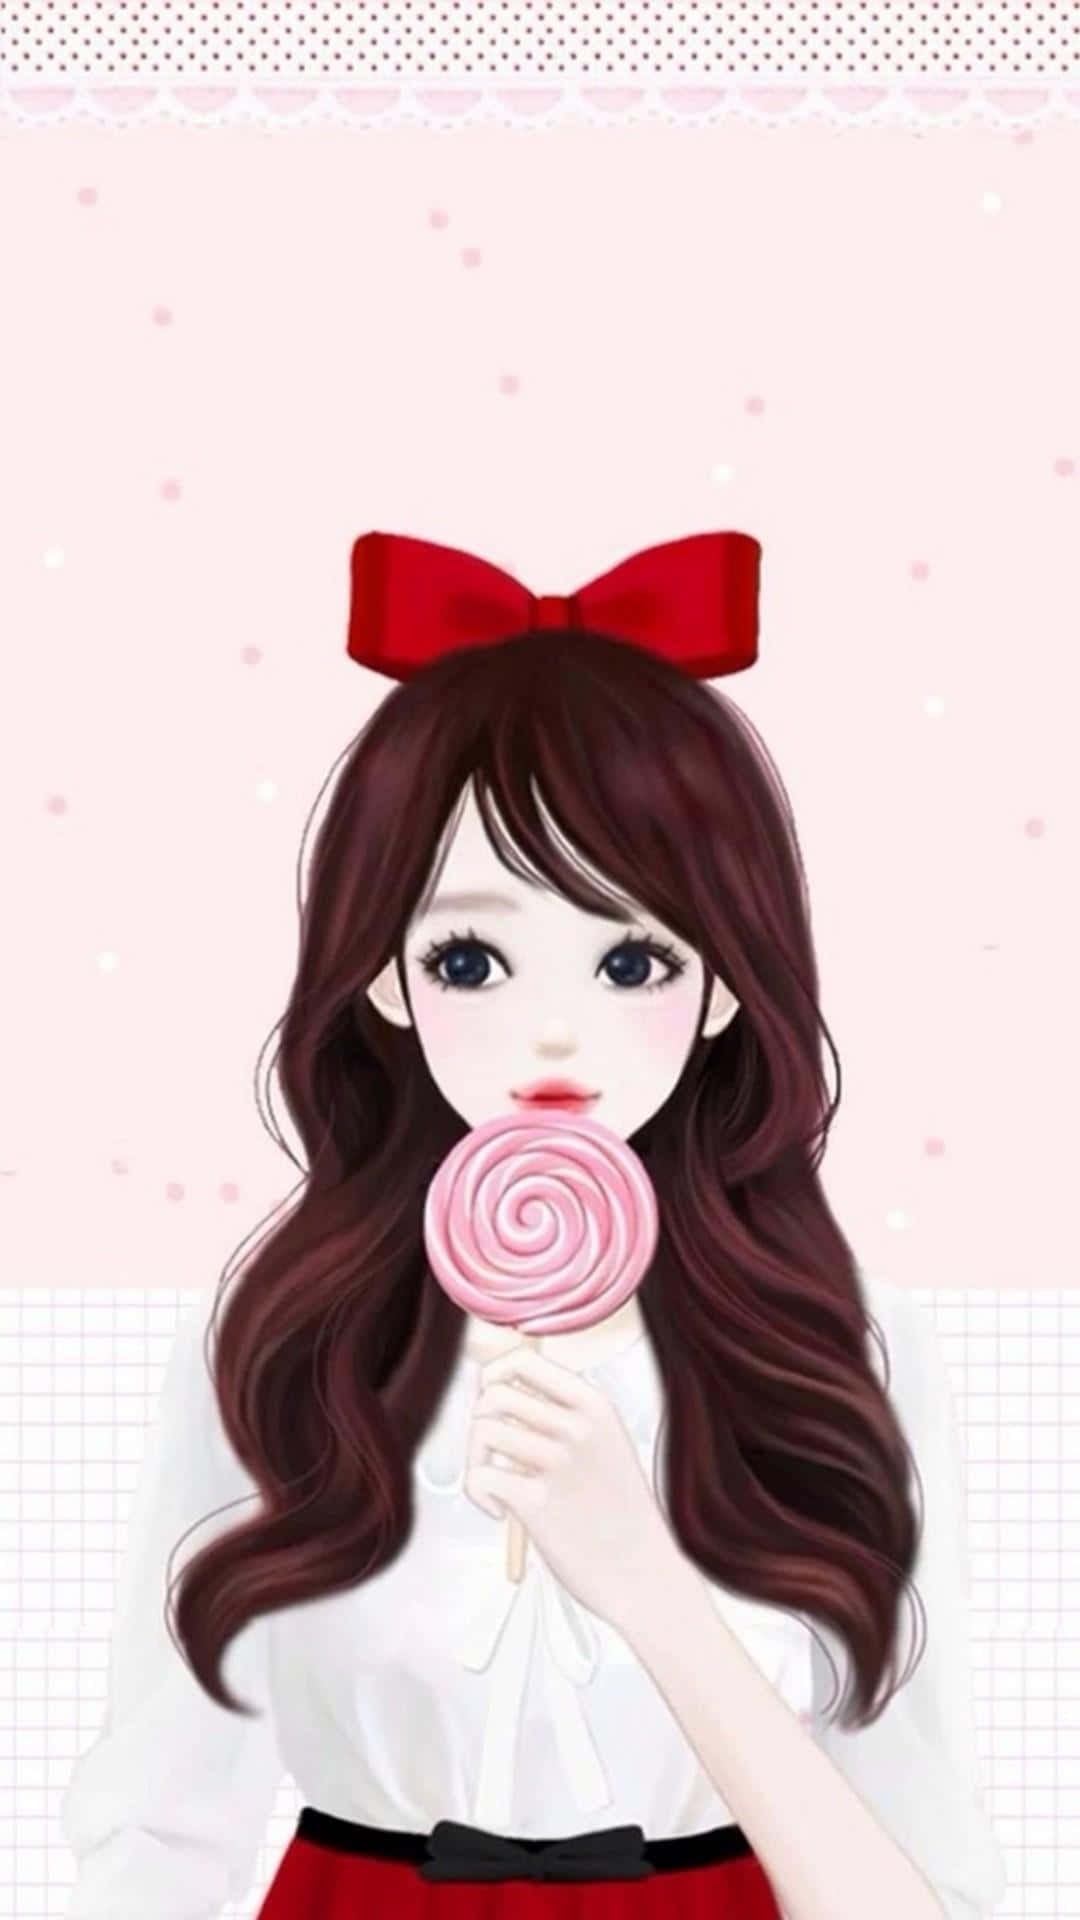 Girl Doll Wallpaper Download | MobCup